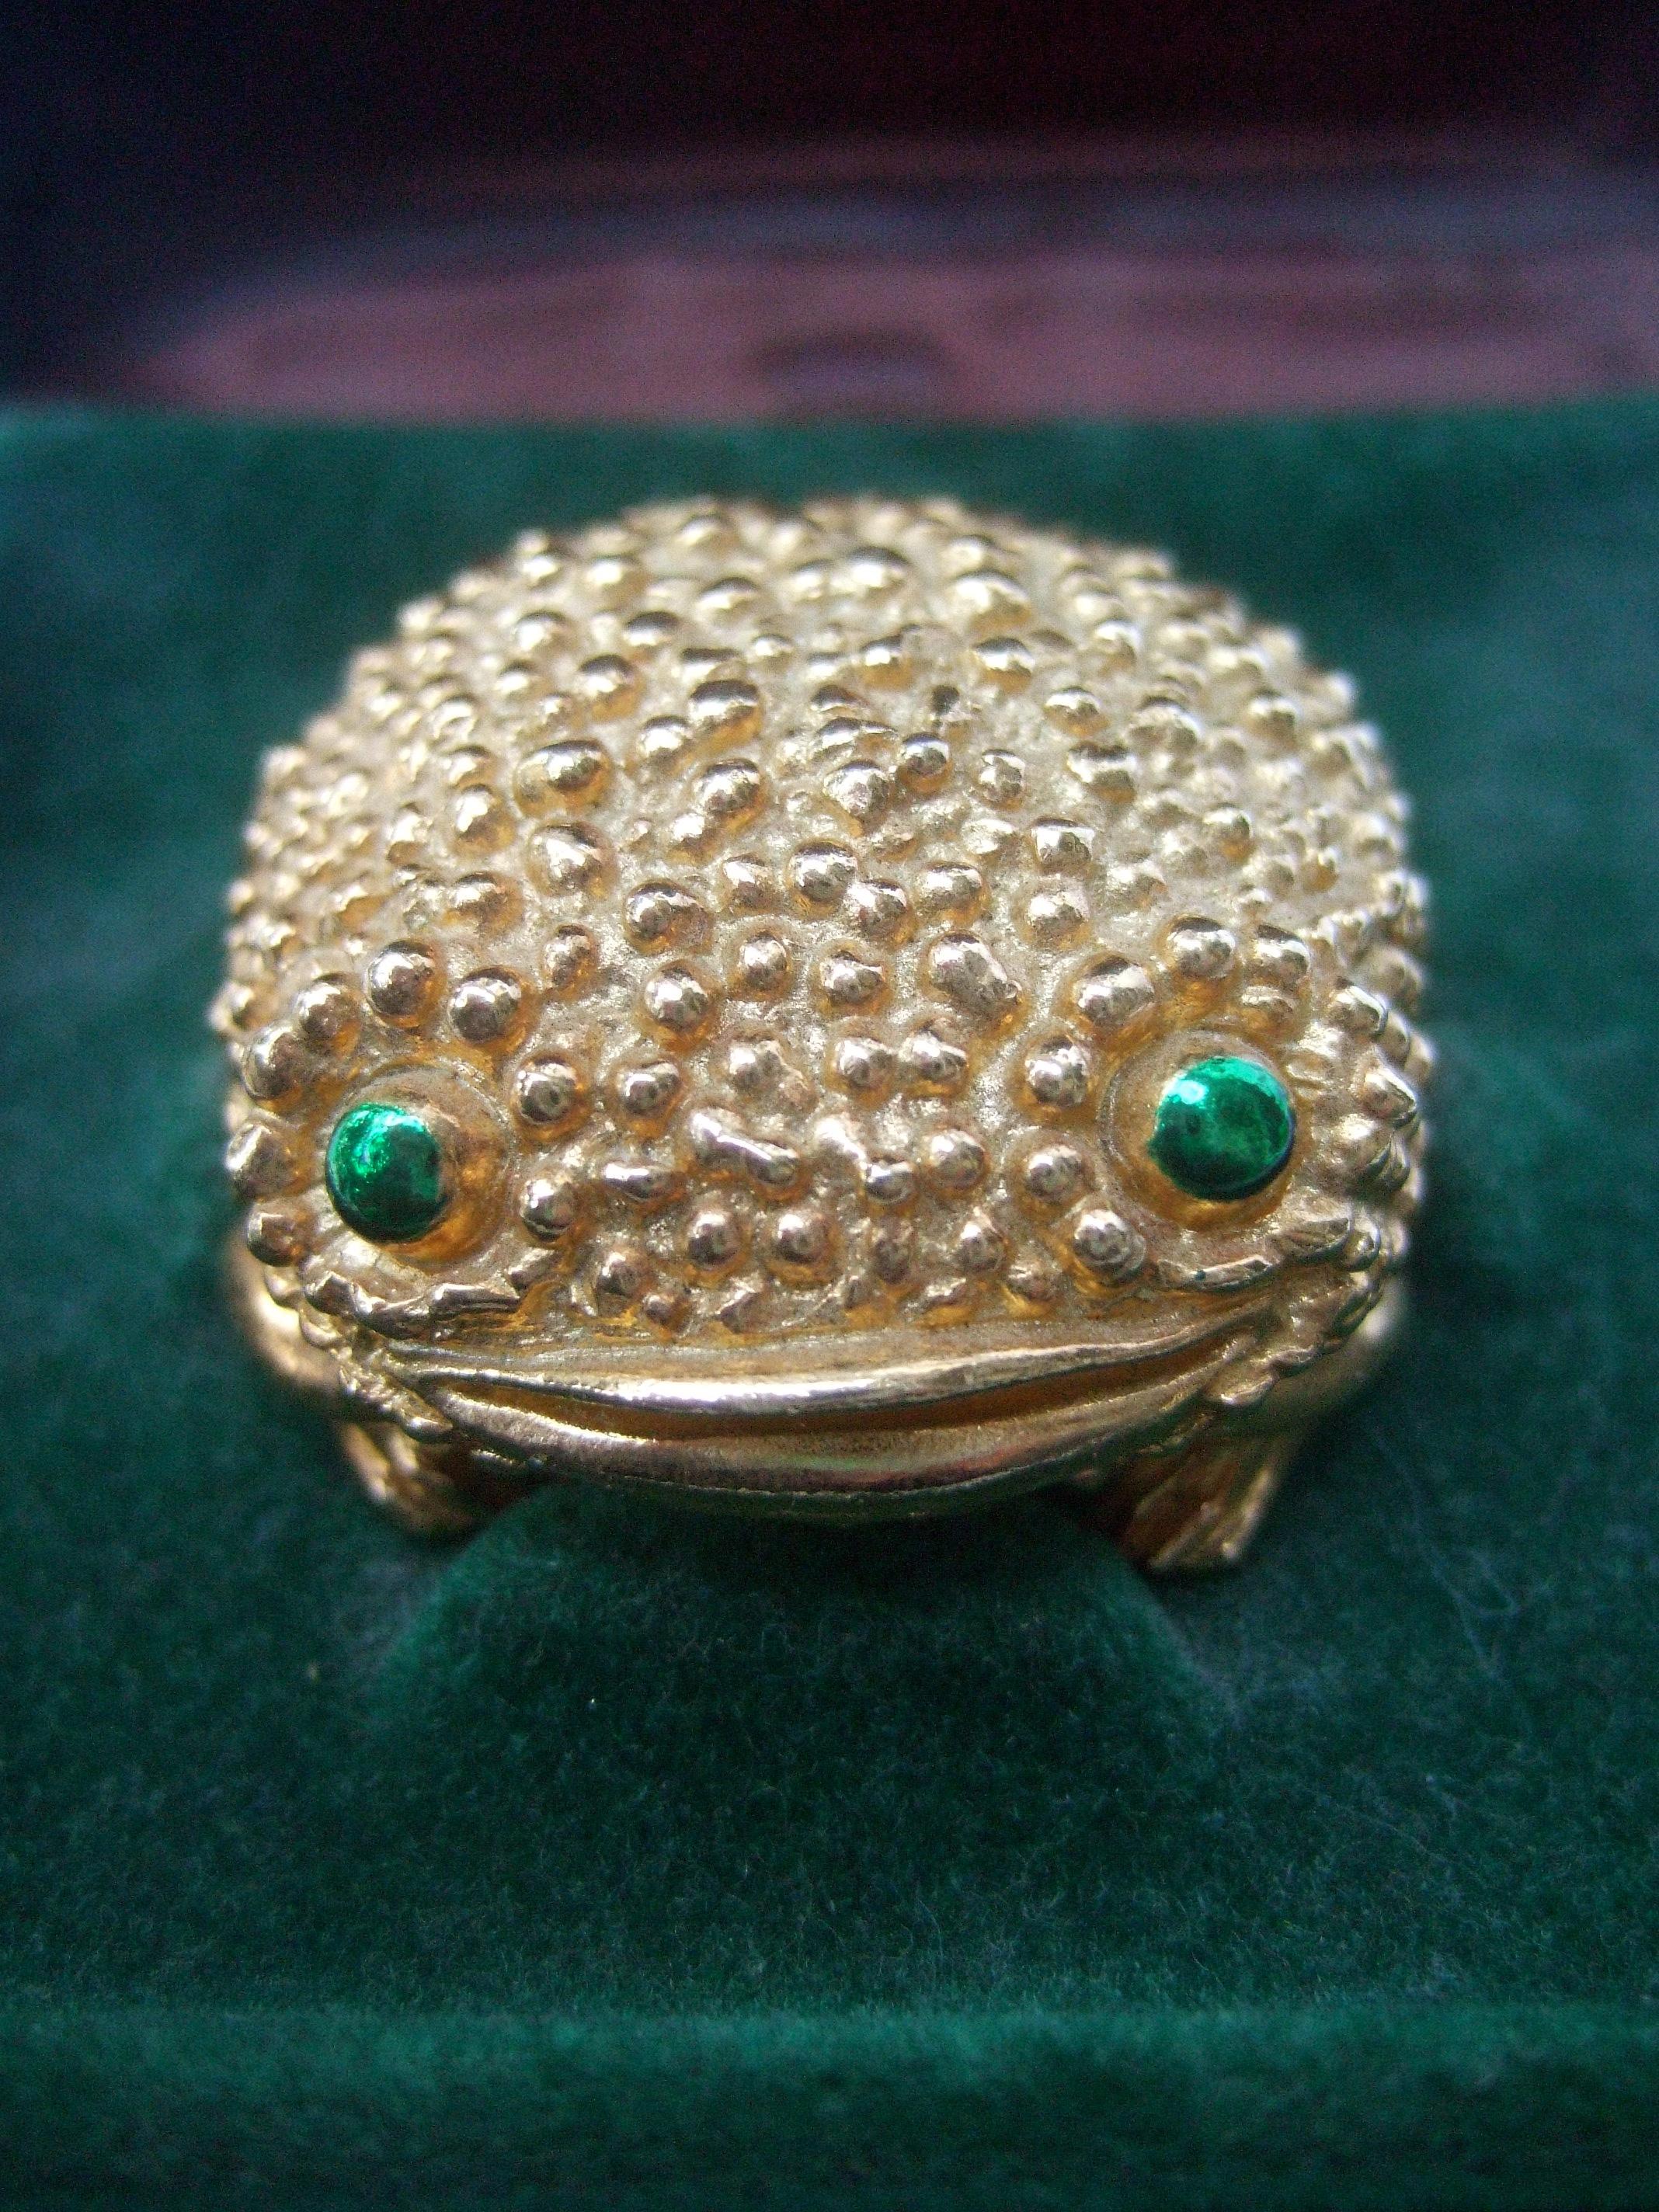 David Webb for Revlon costume frog wax perfume container in the original presentation box c 1970s
David Webb collaborated with Revlon & created a series of costume animal wax fragrance creatures 
The endearing gilt metal costume frog has textured